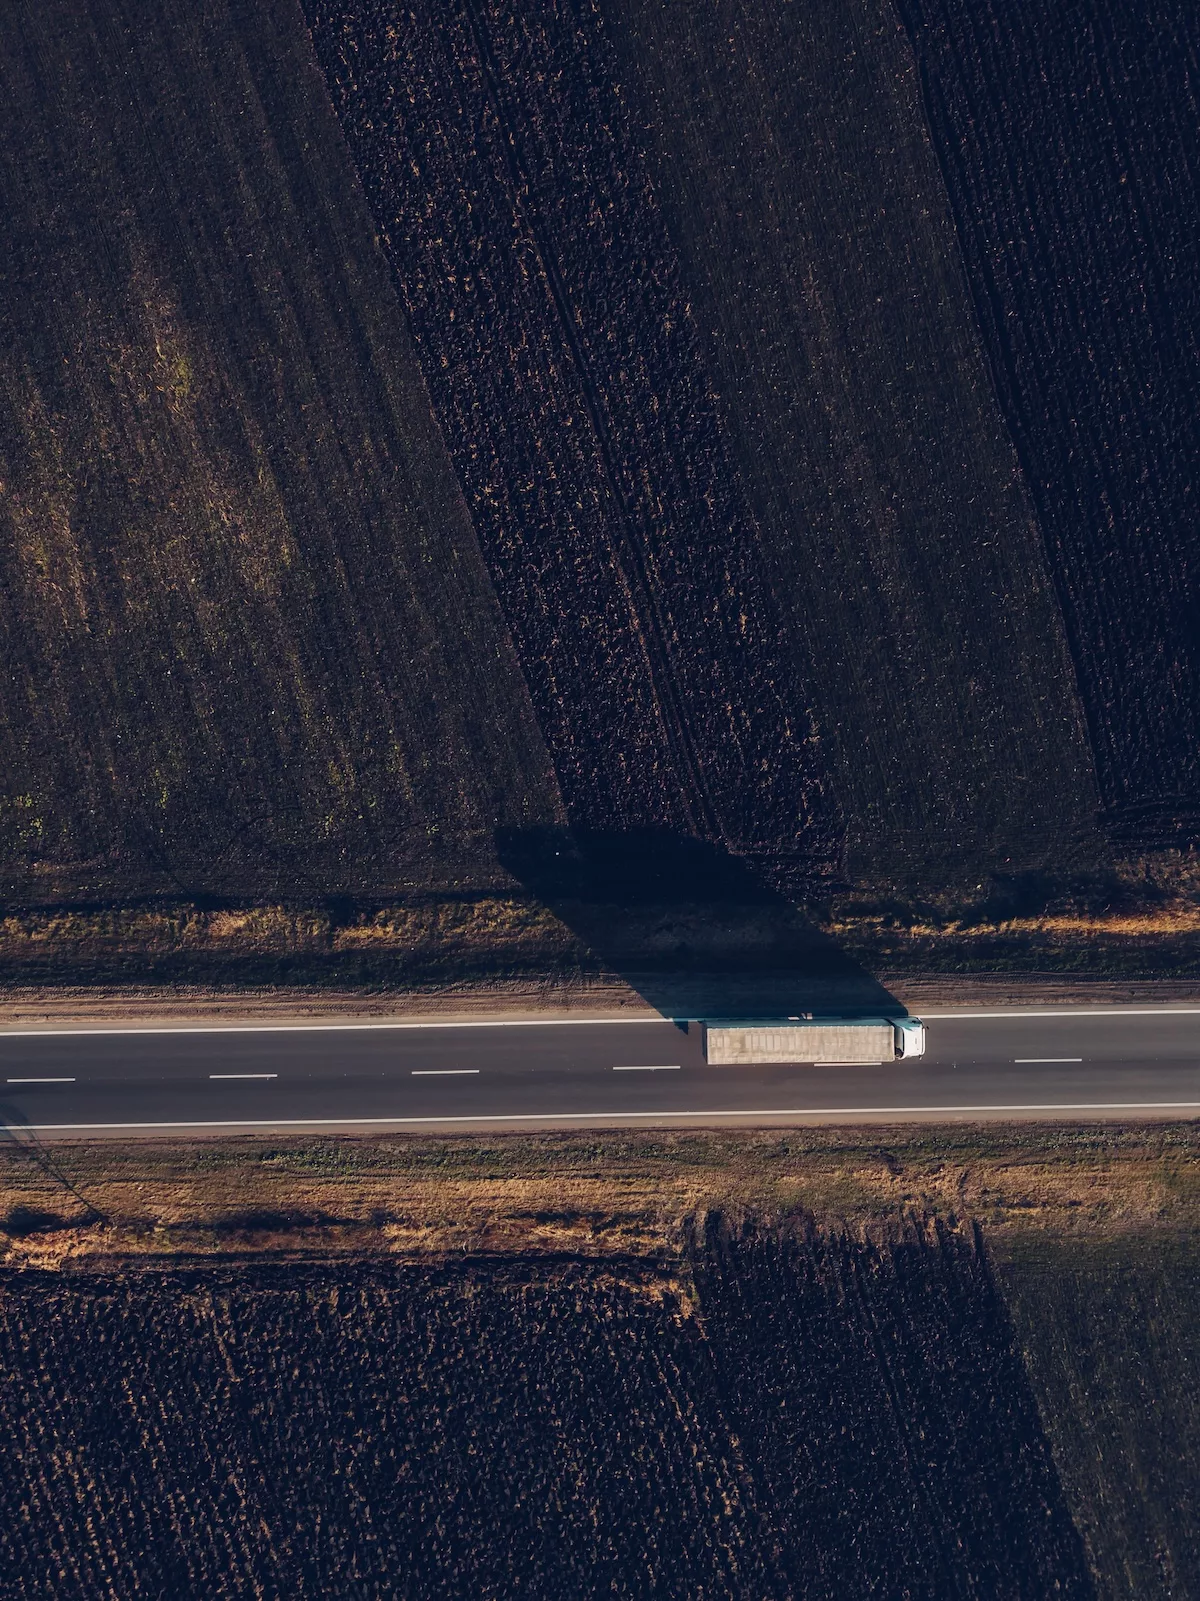 Aerial view of freight transportation truck on the road